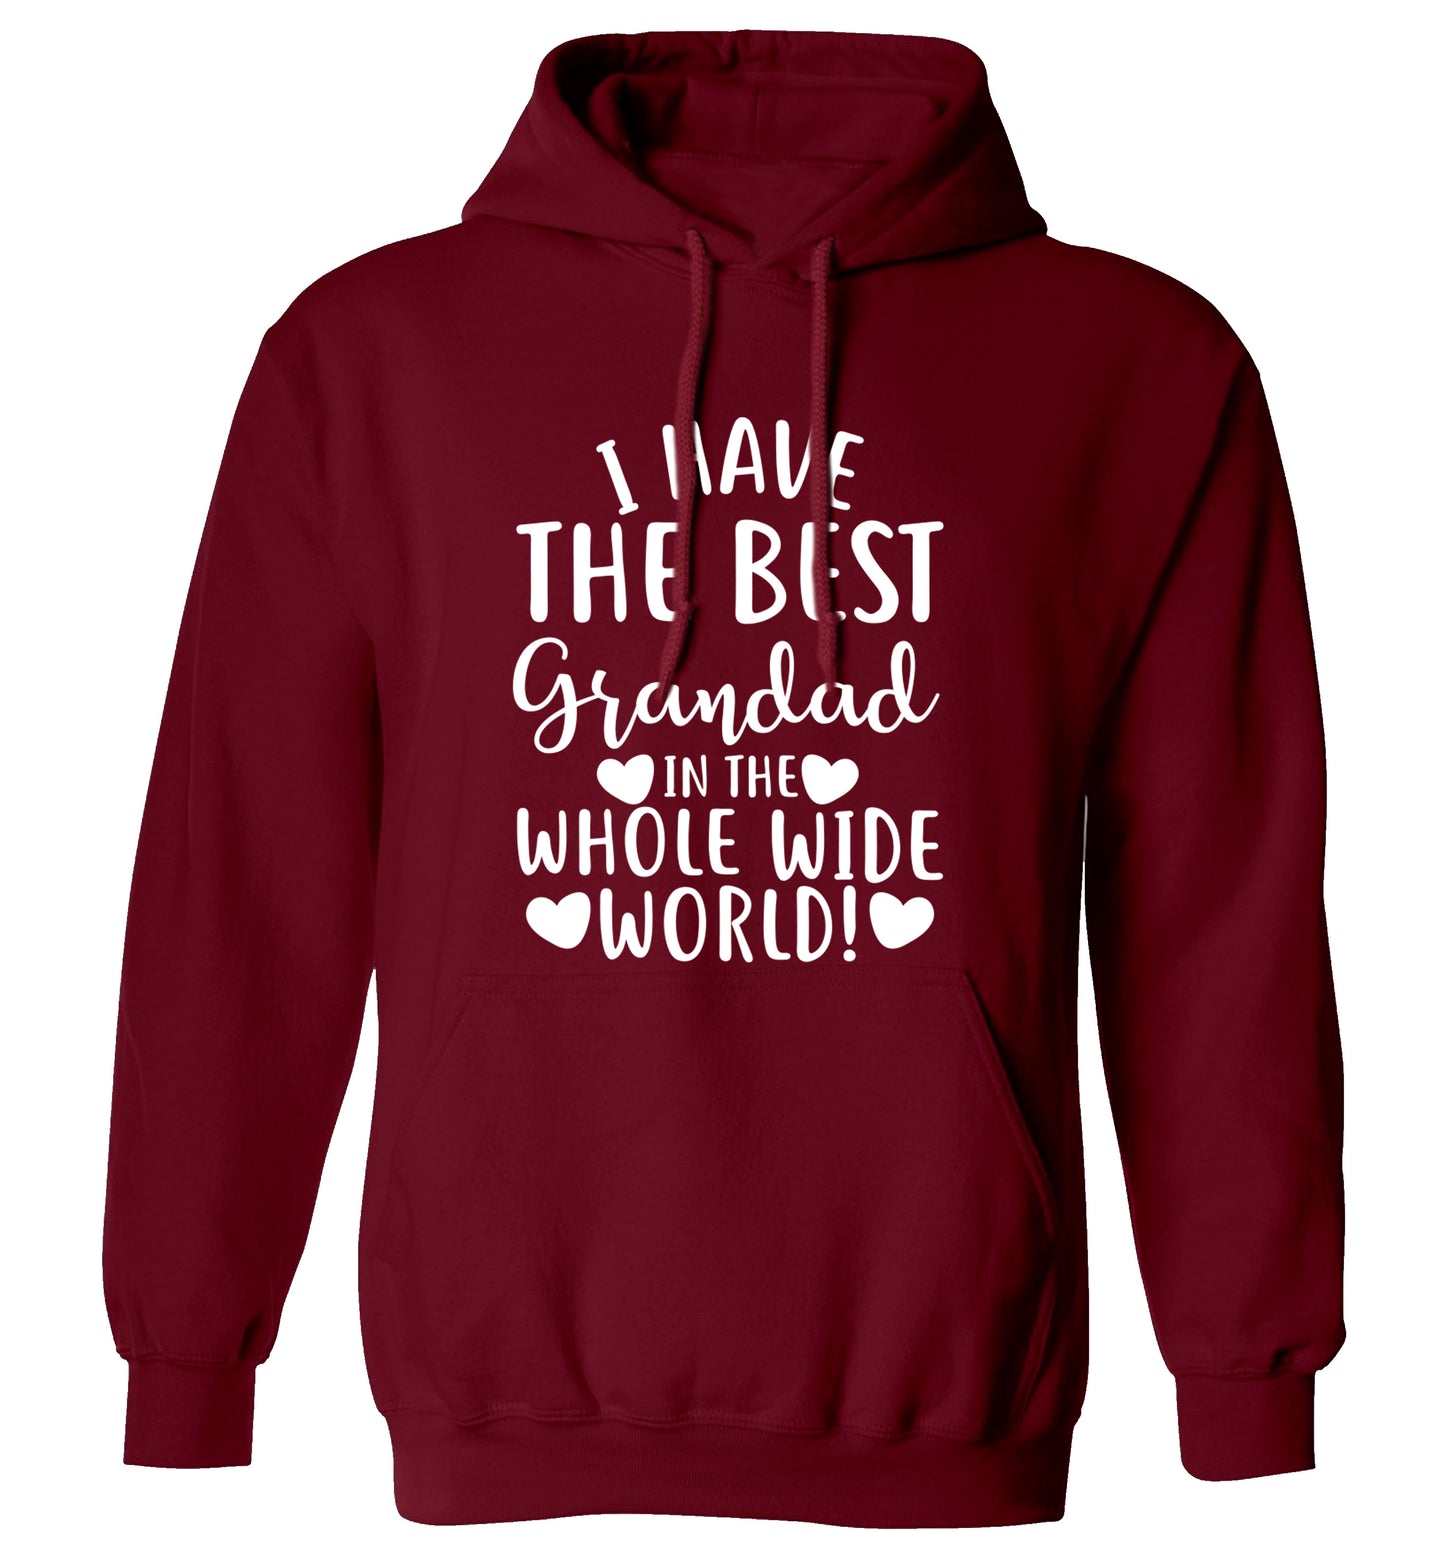 I have the best grandad in the whole wide world! adults unisex maroon hoodie 2XL